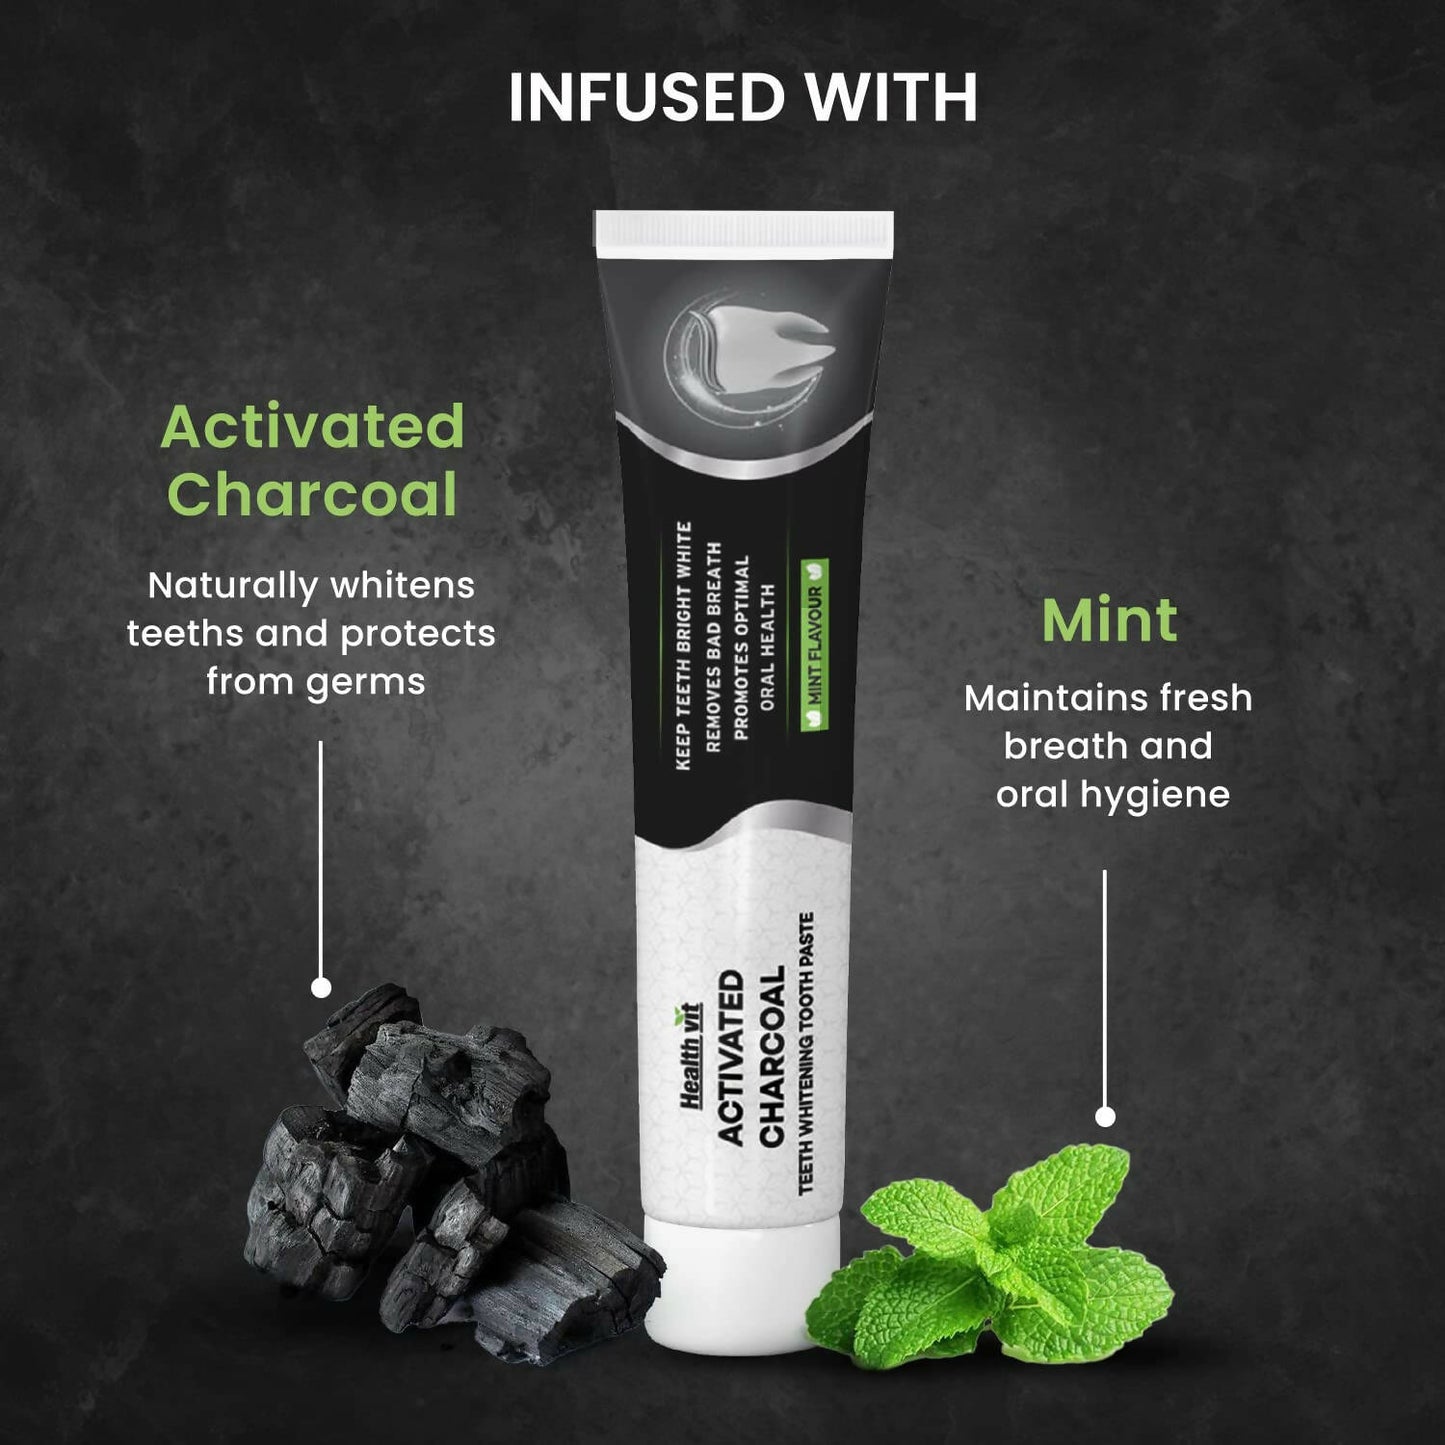 Healthvit Activated Charcoal Toothpaste